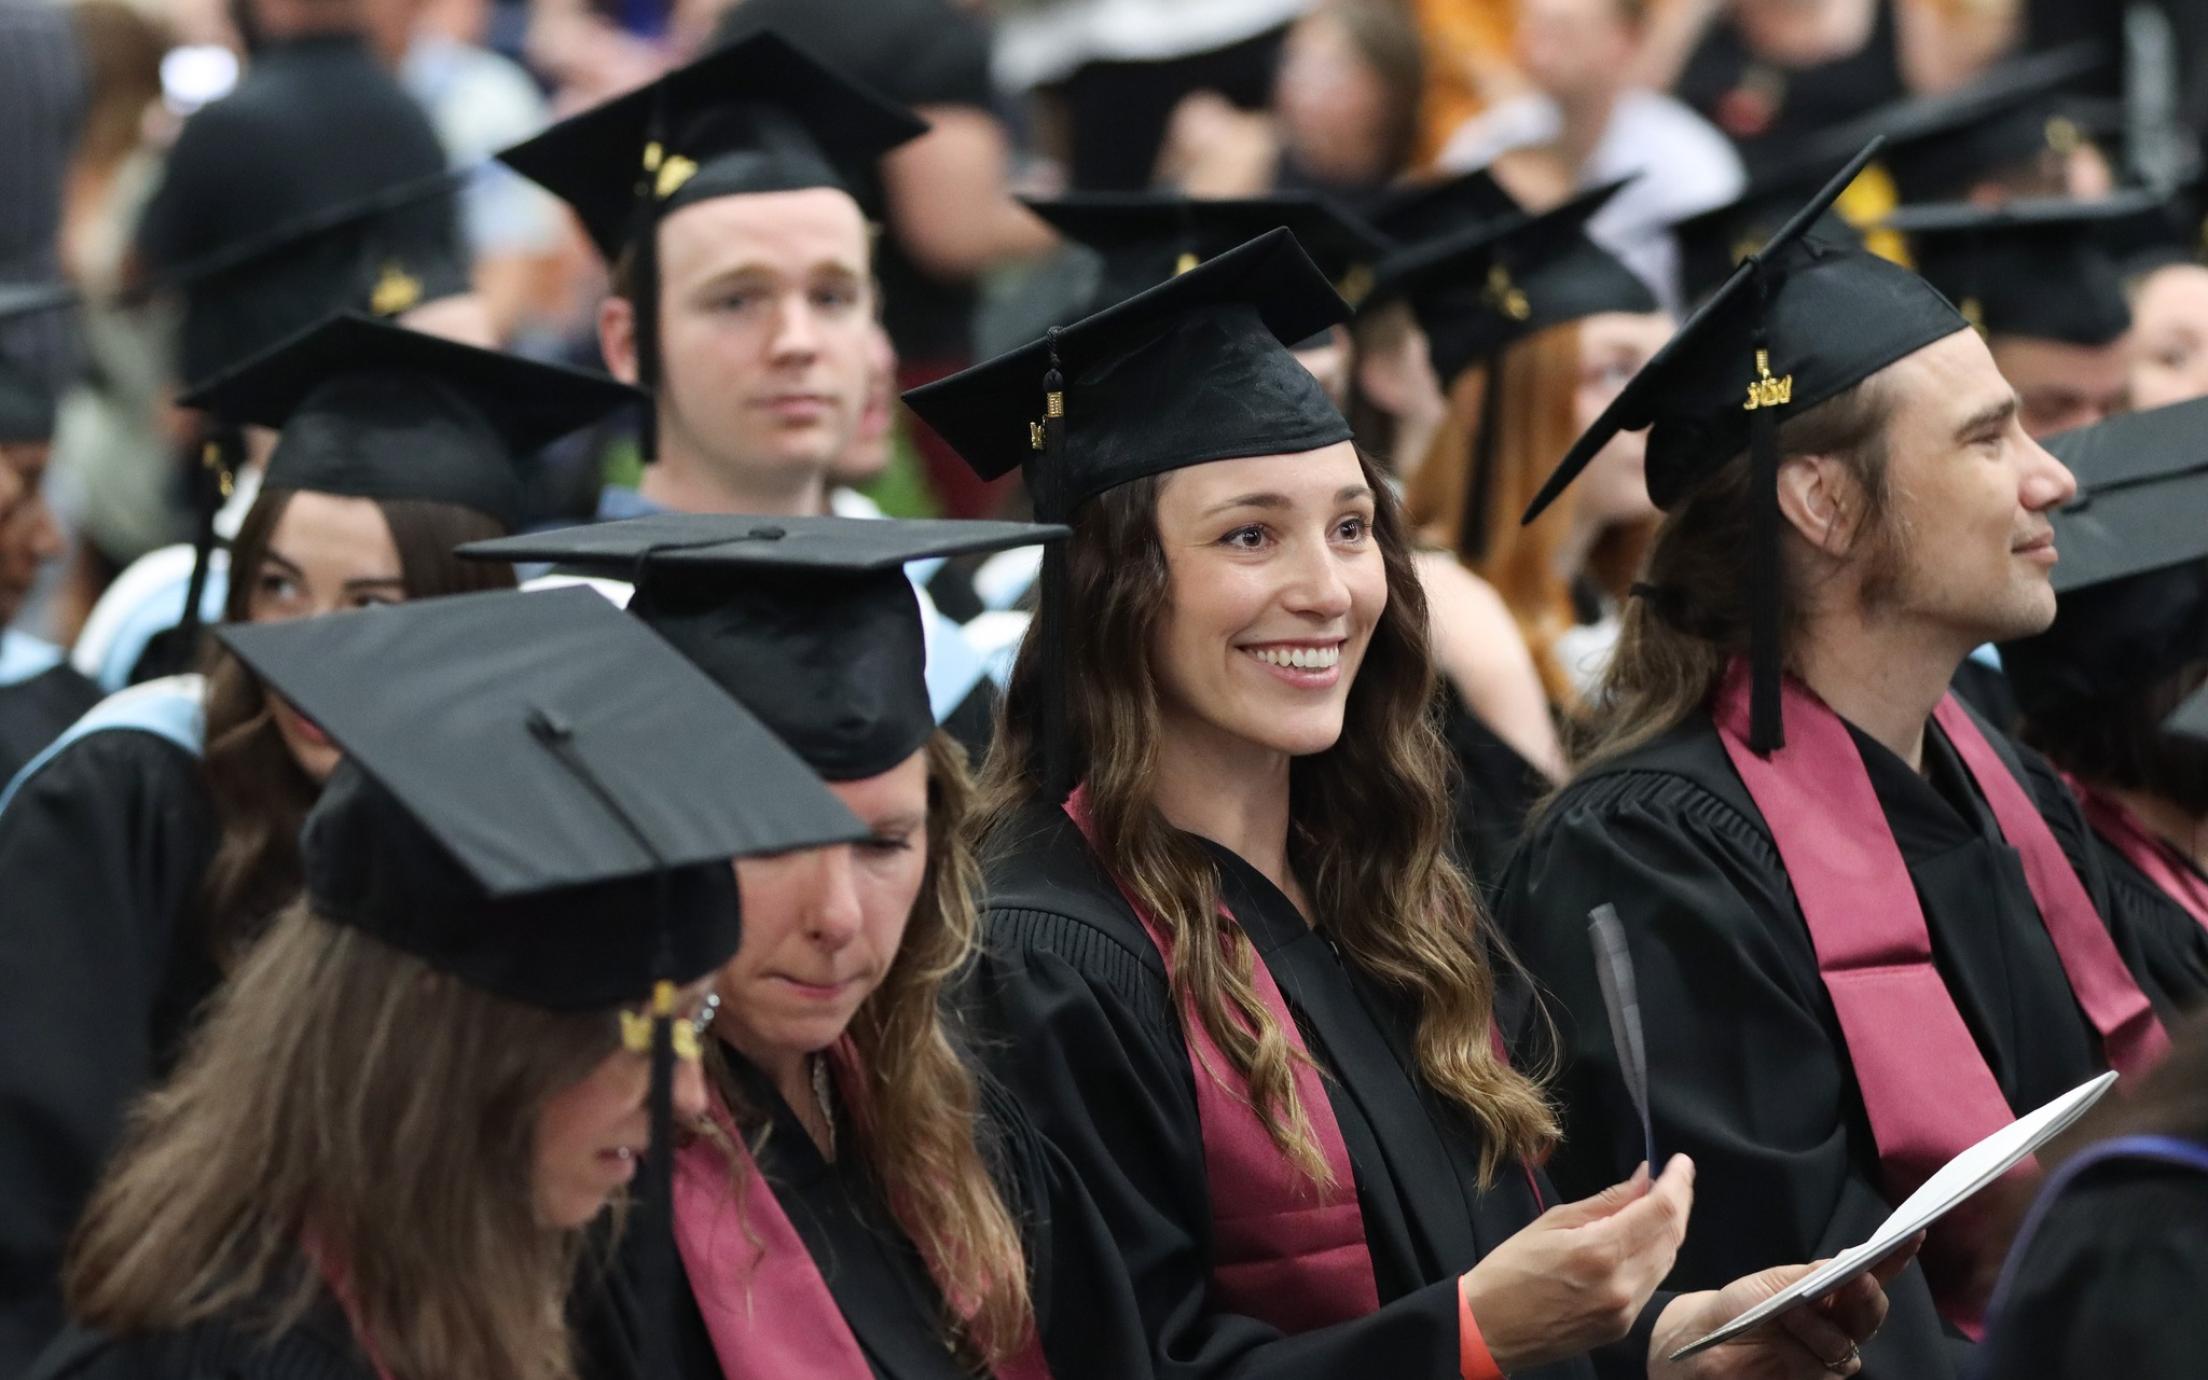 A group of graduates smile and listen to speeches